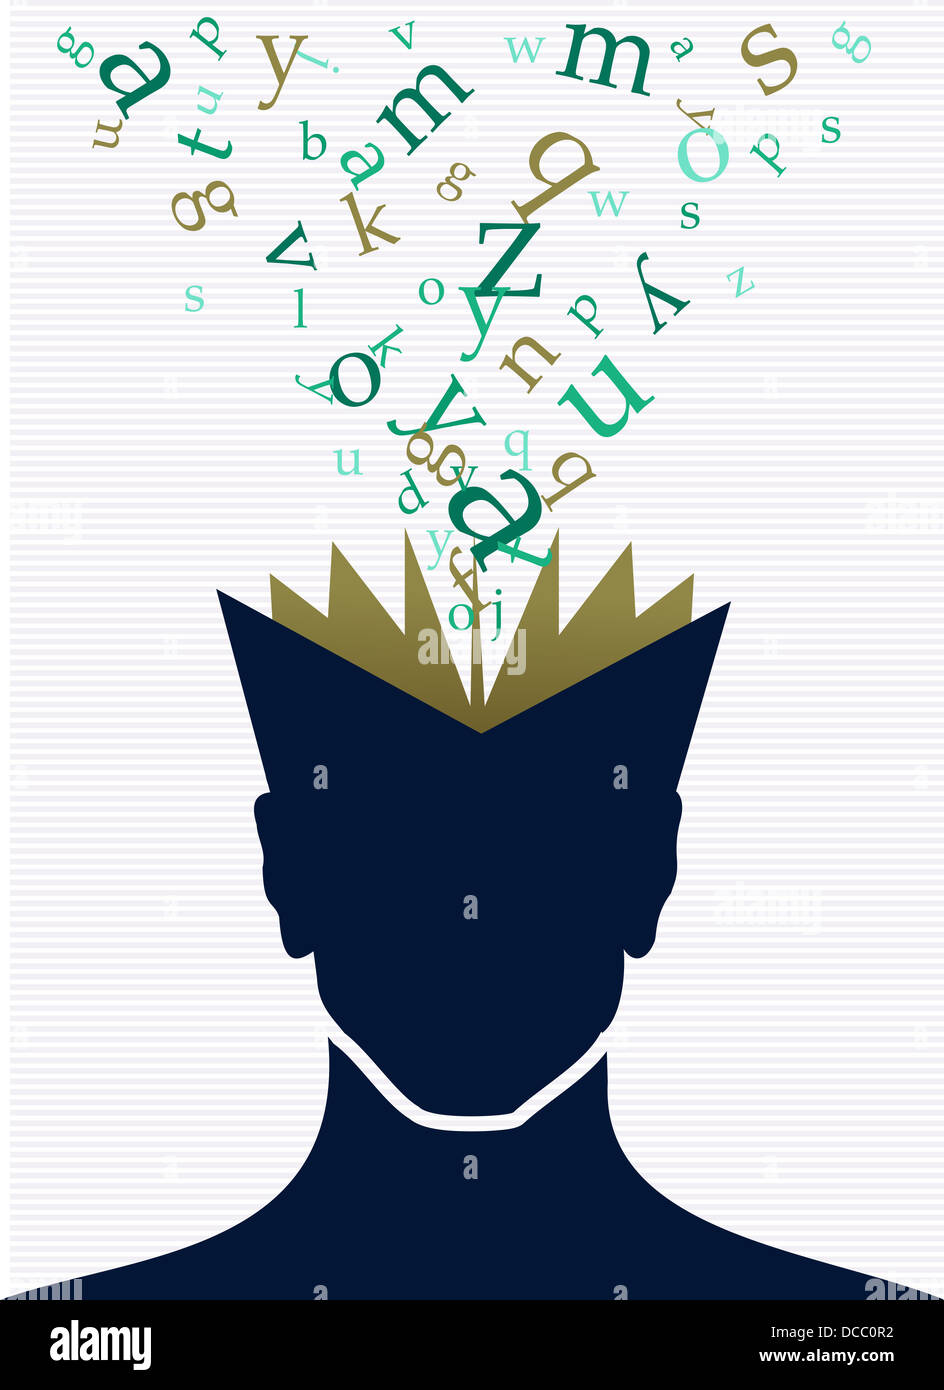 Vintage human head open book words splash illustration. Vector file layered for easy manipulation and custom coloring. Stock Photo